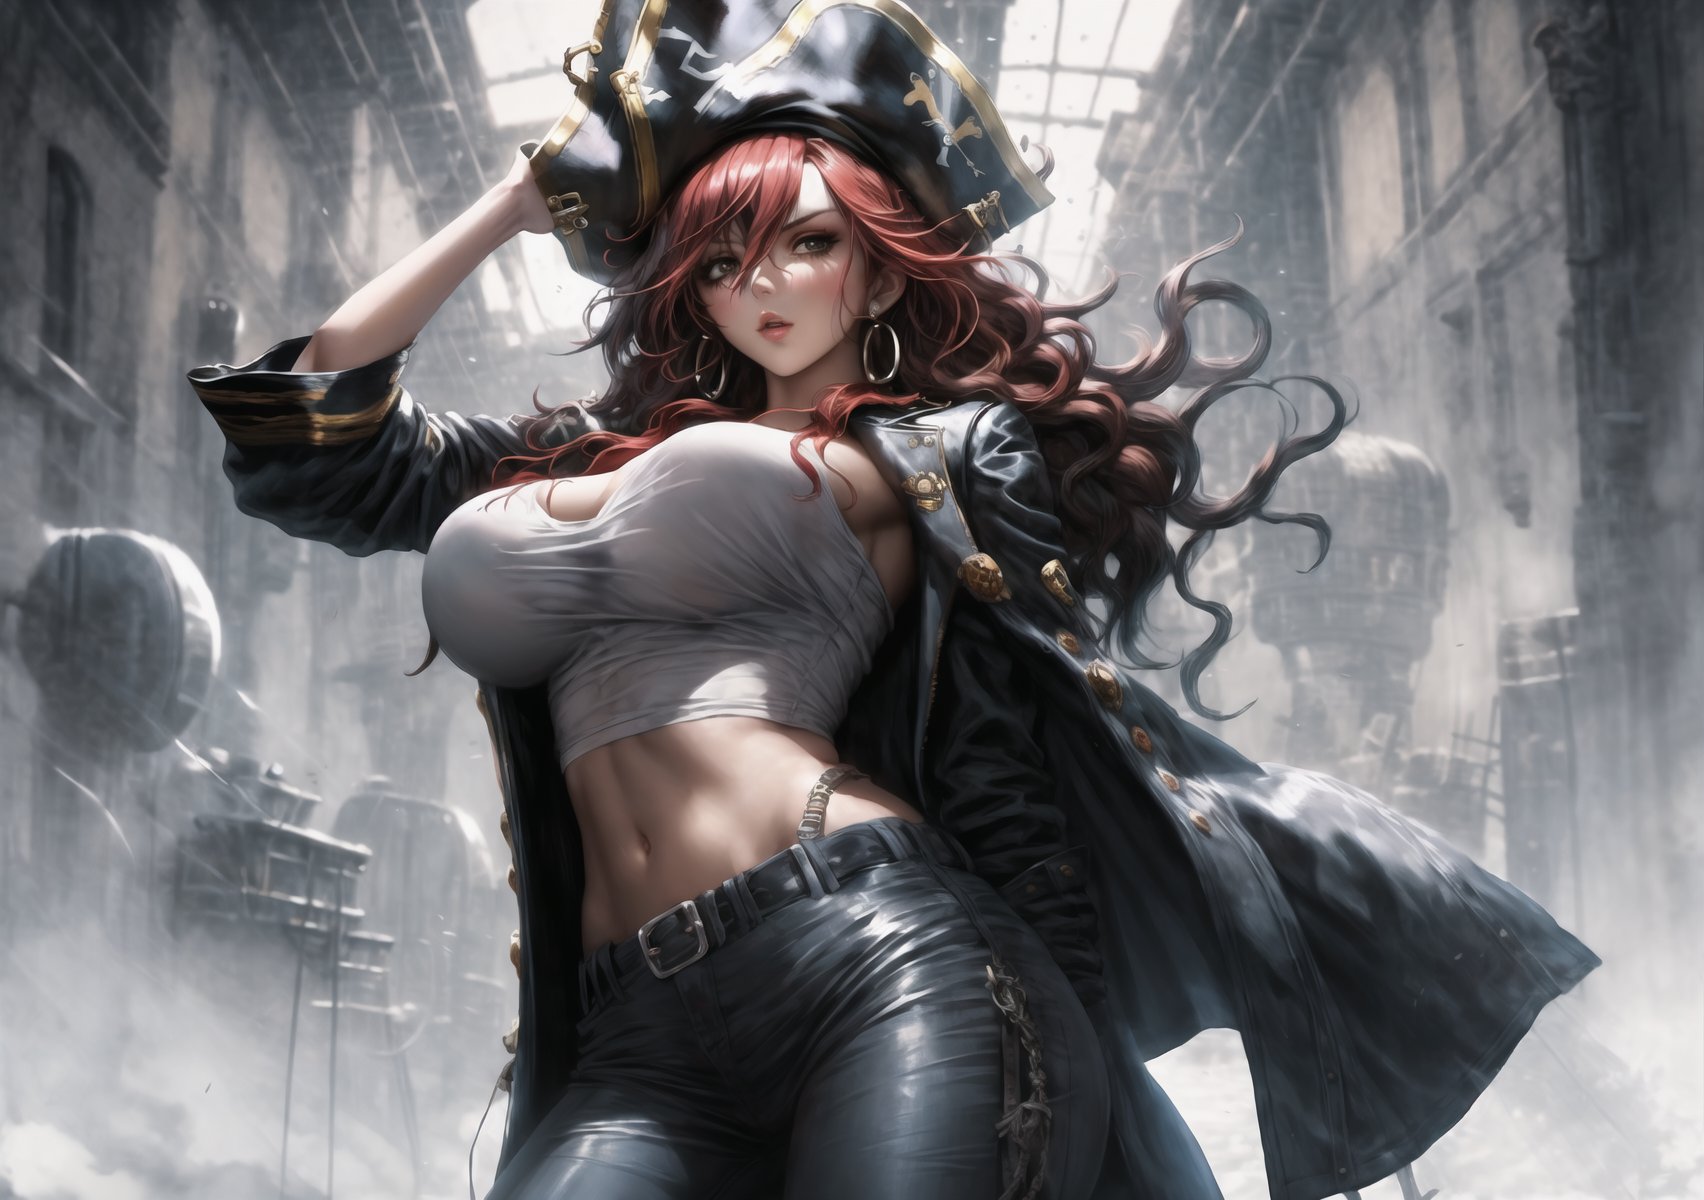 French magazine cover, 1voluptuous woman, alone, (crimson hair, long hair, wavy hair), hair between eyes, big pirate jacket, white T-shirt, pirate pants, huge boobs and hips, dynamic pose, earrings, jewelry, single, disheveled, background of tavern, pirate hat,